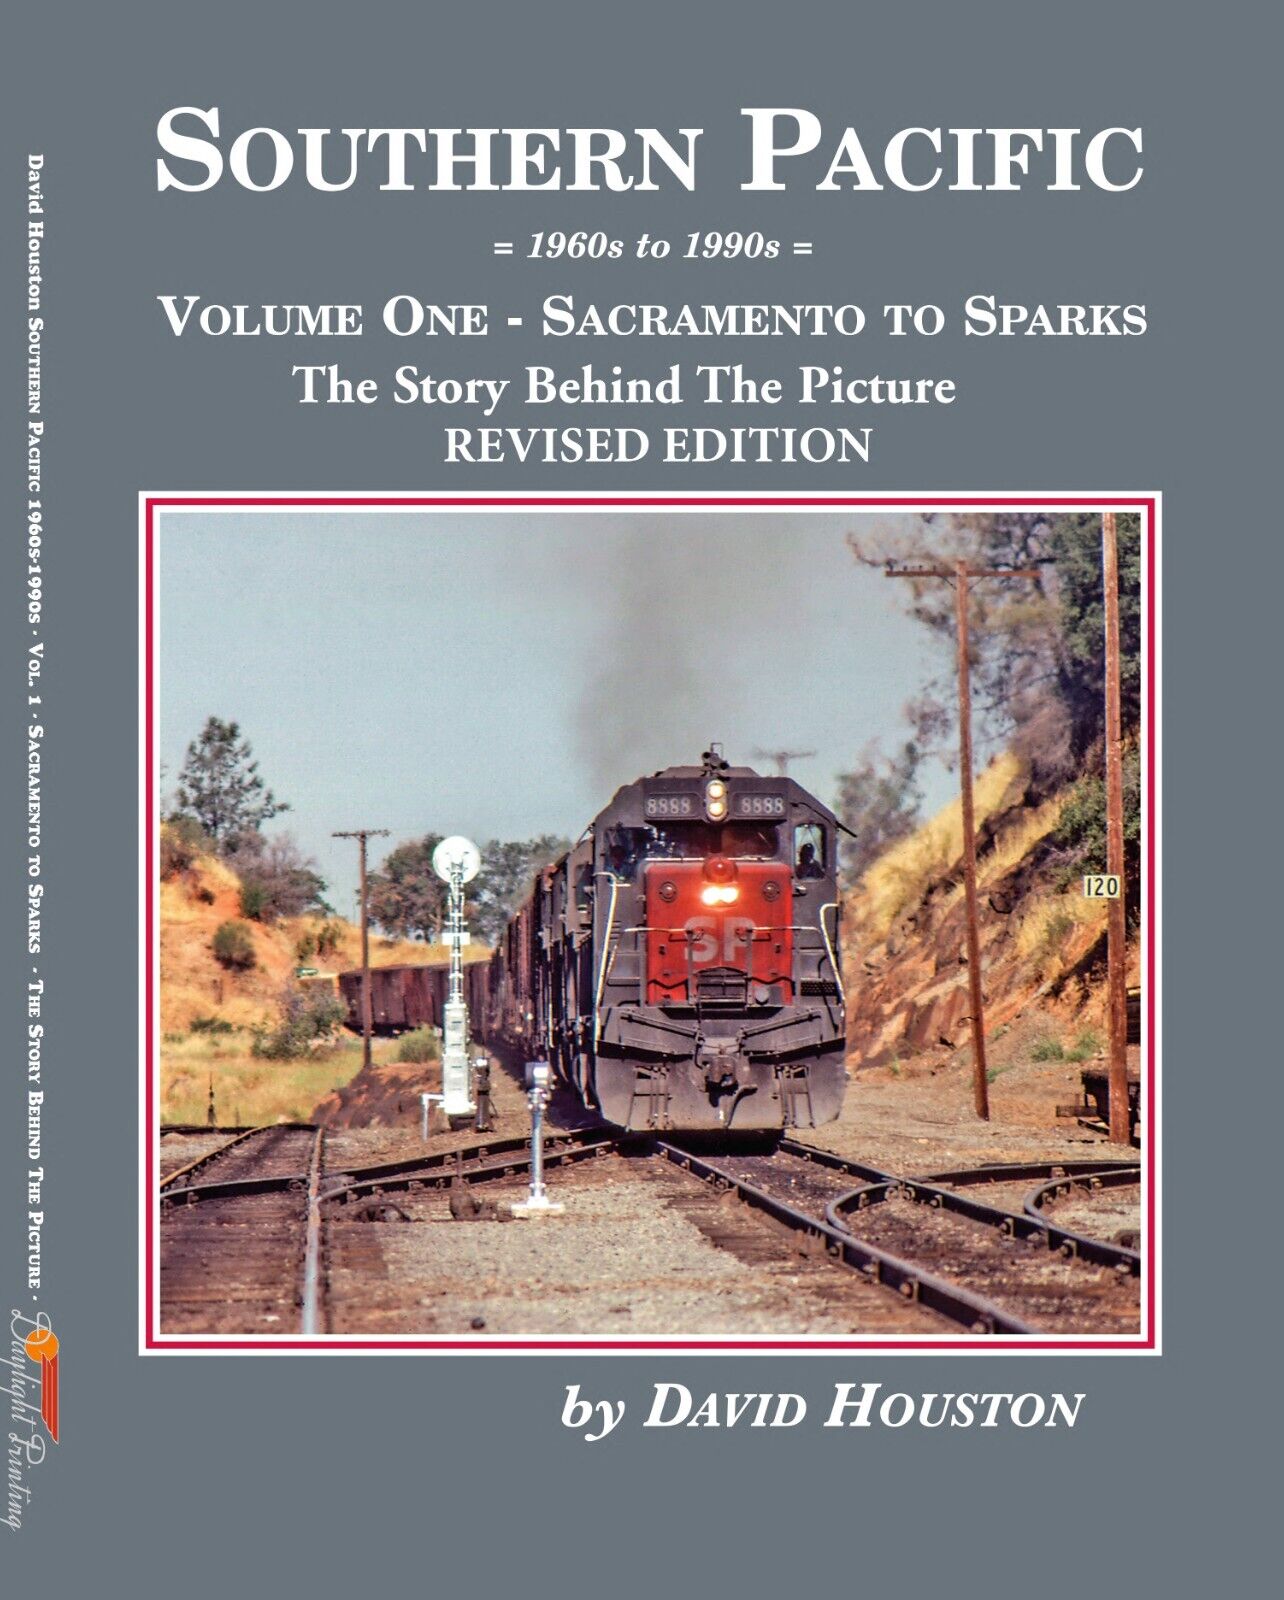 SOUTHERN PACIFIC Sacramento to Sparks Revised Edition, Vol 1